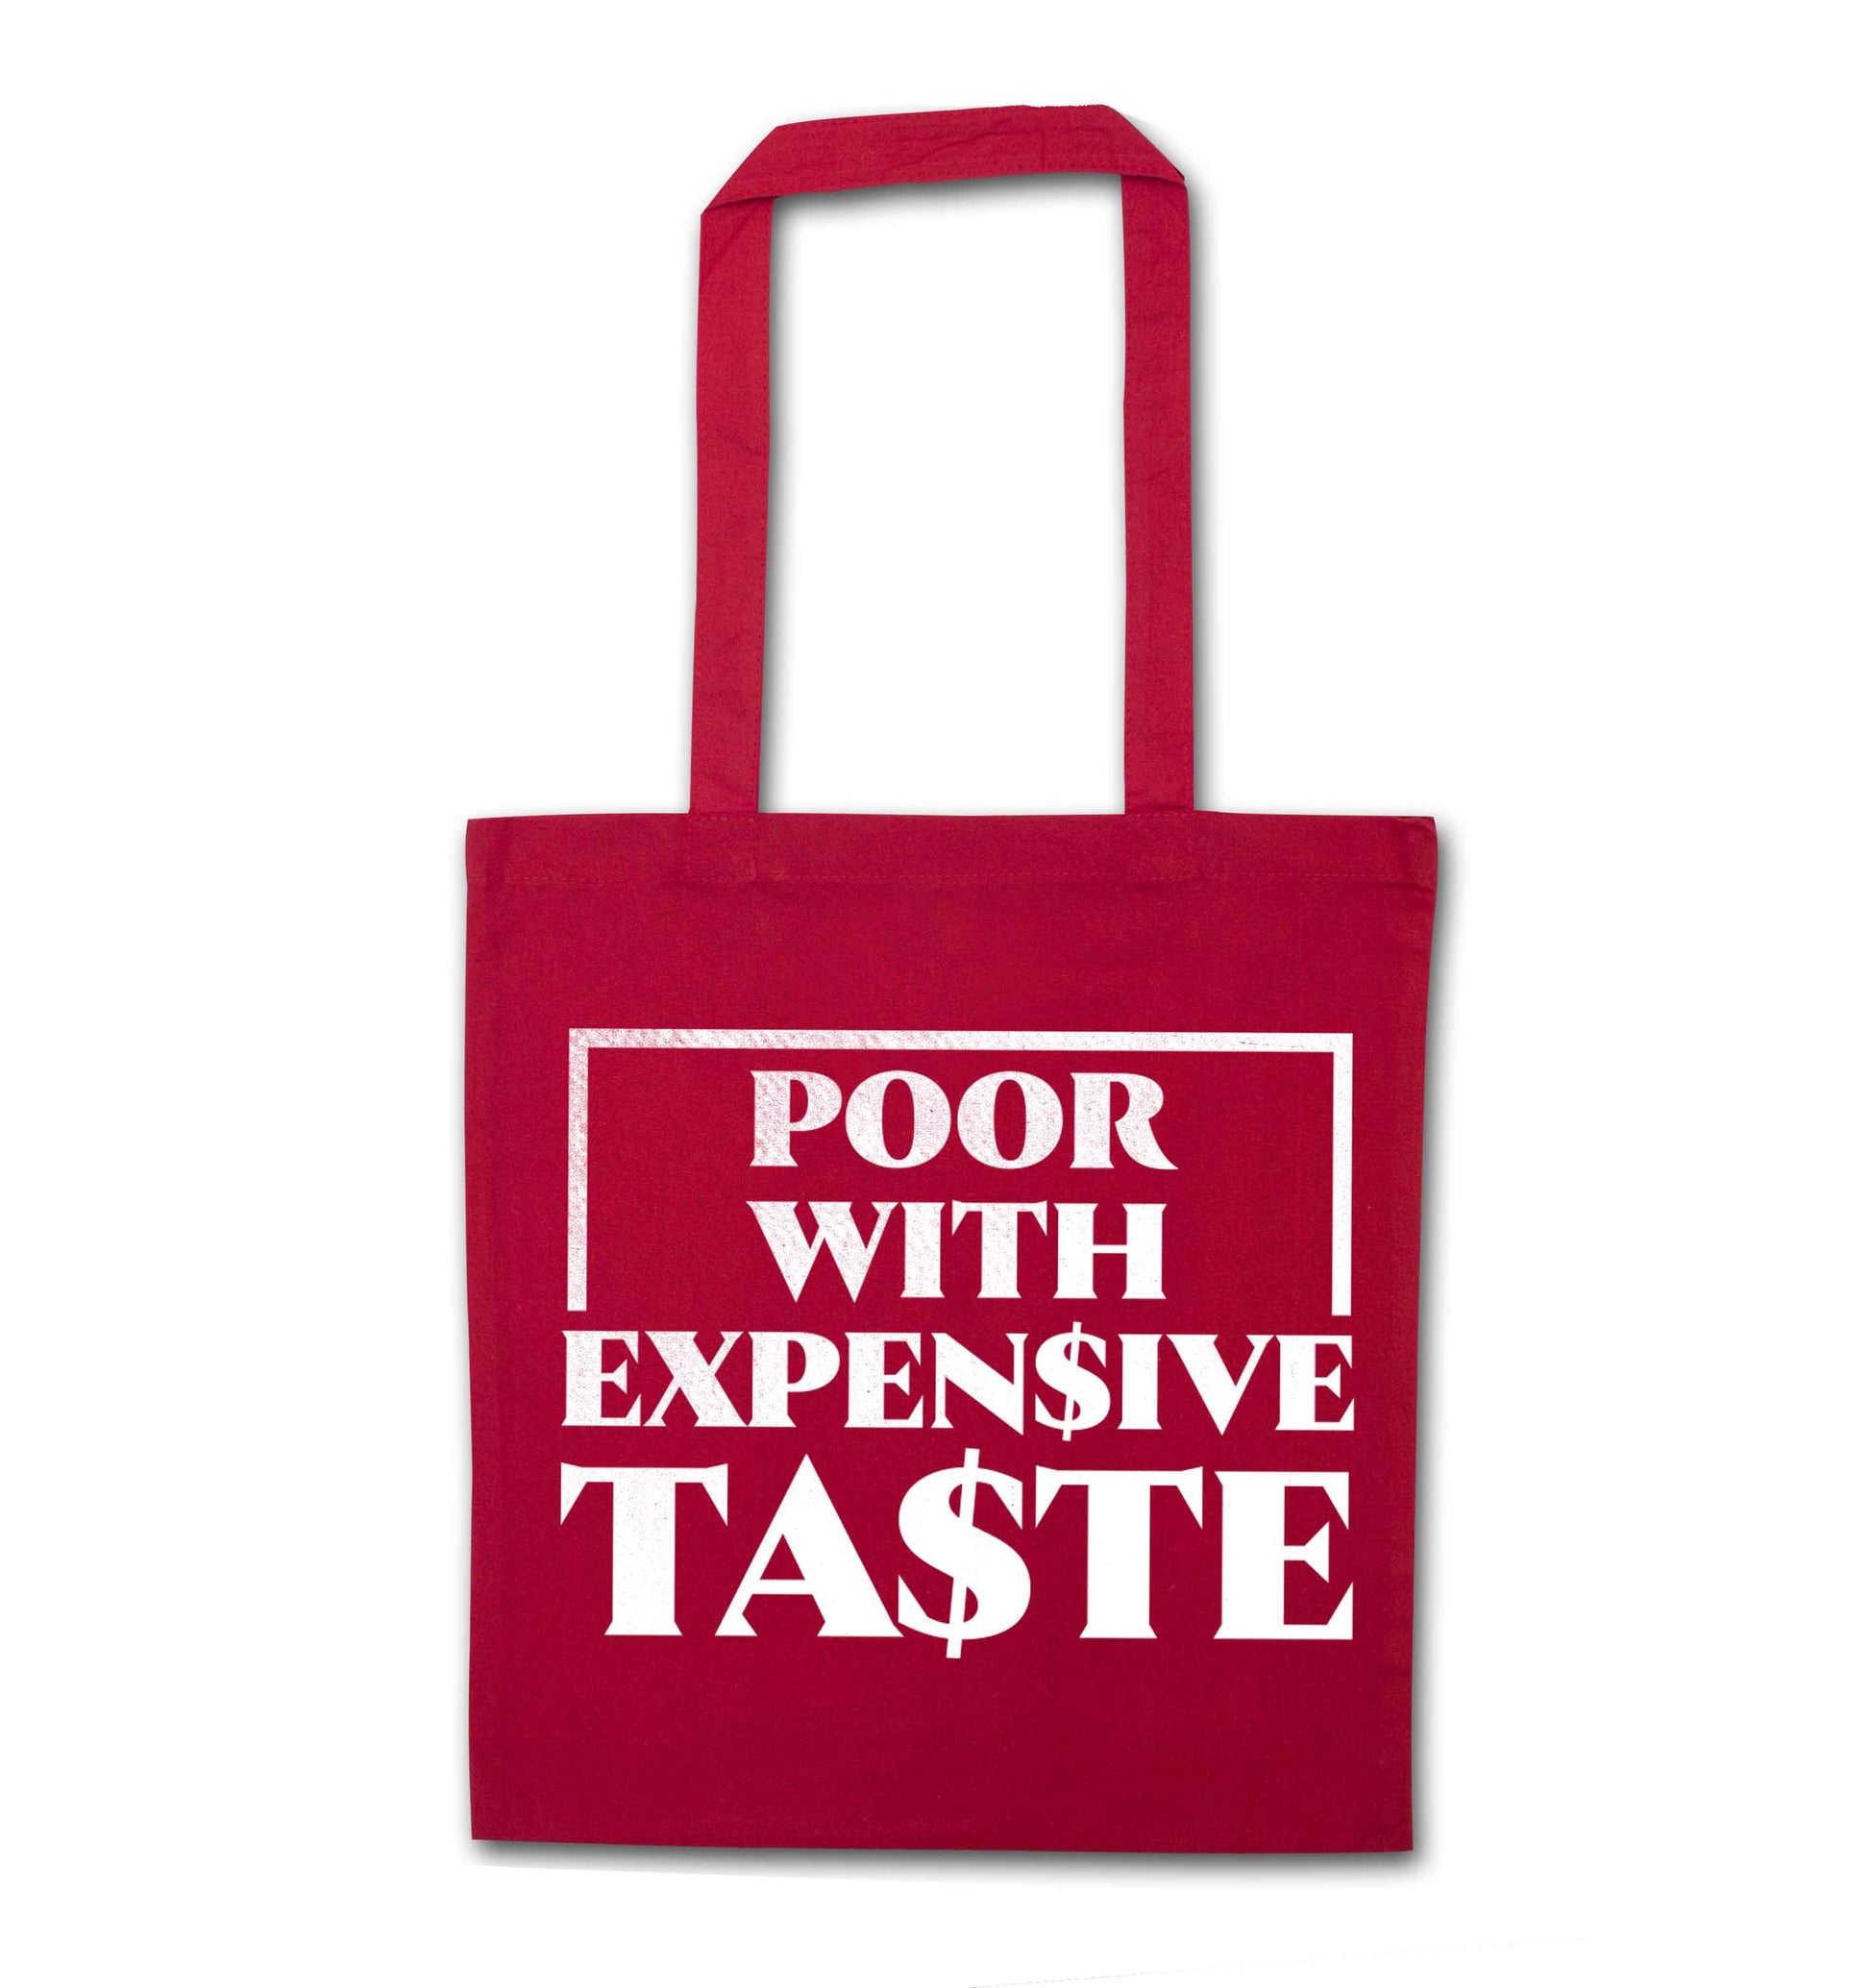 Poor with expensive taste red tote bag